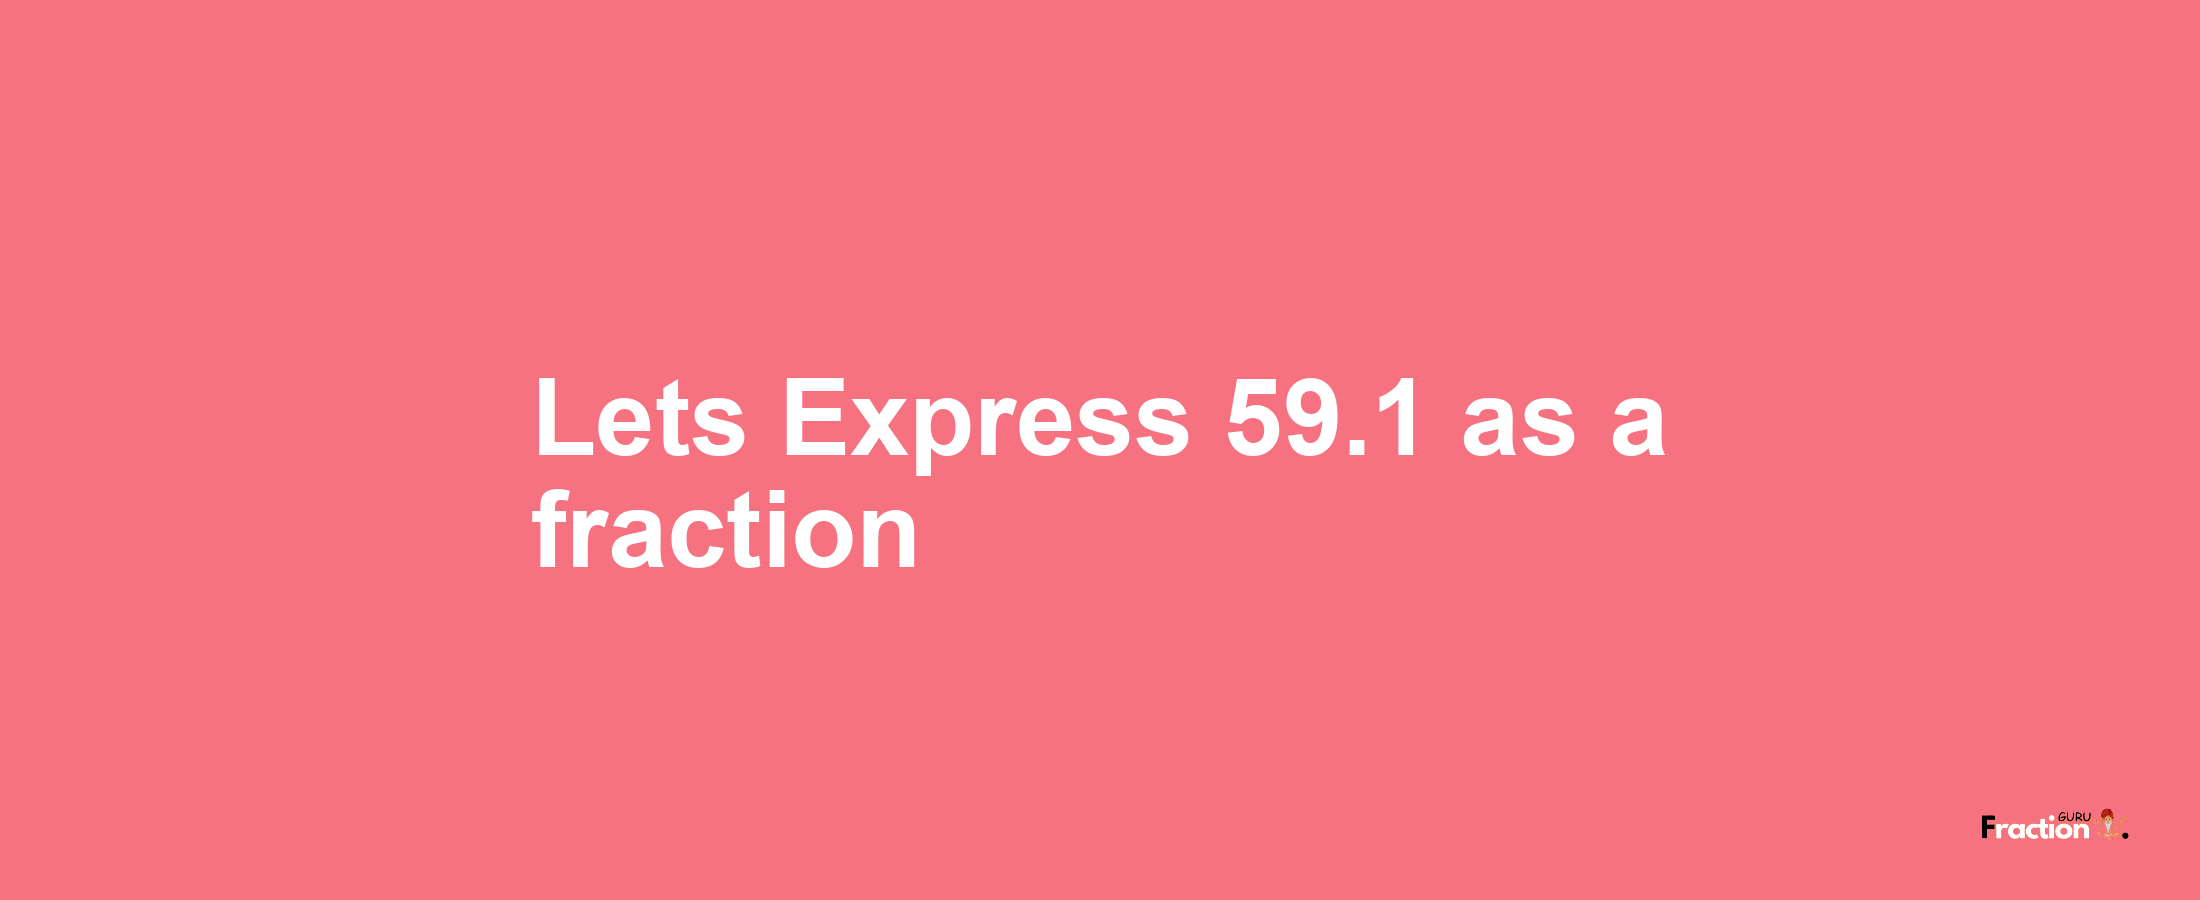 Lets Express 59.1 as afraction